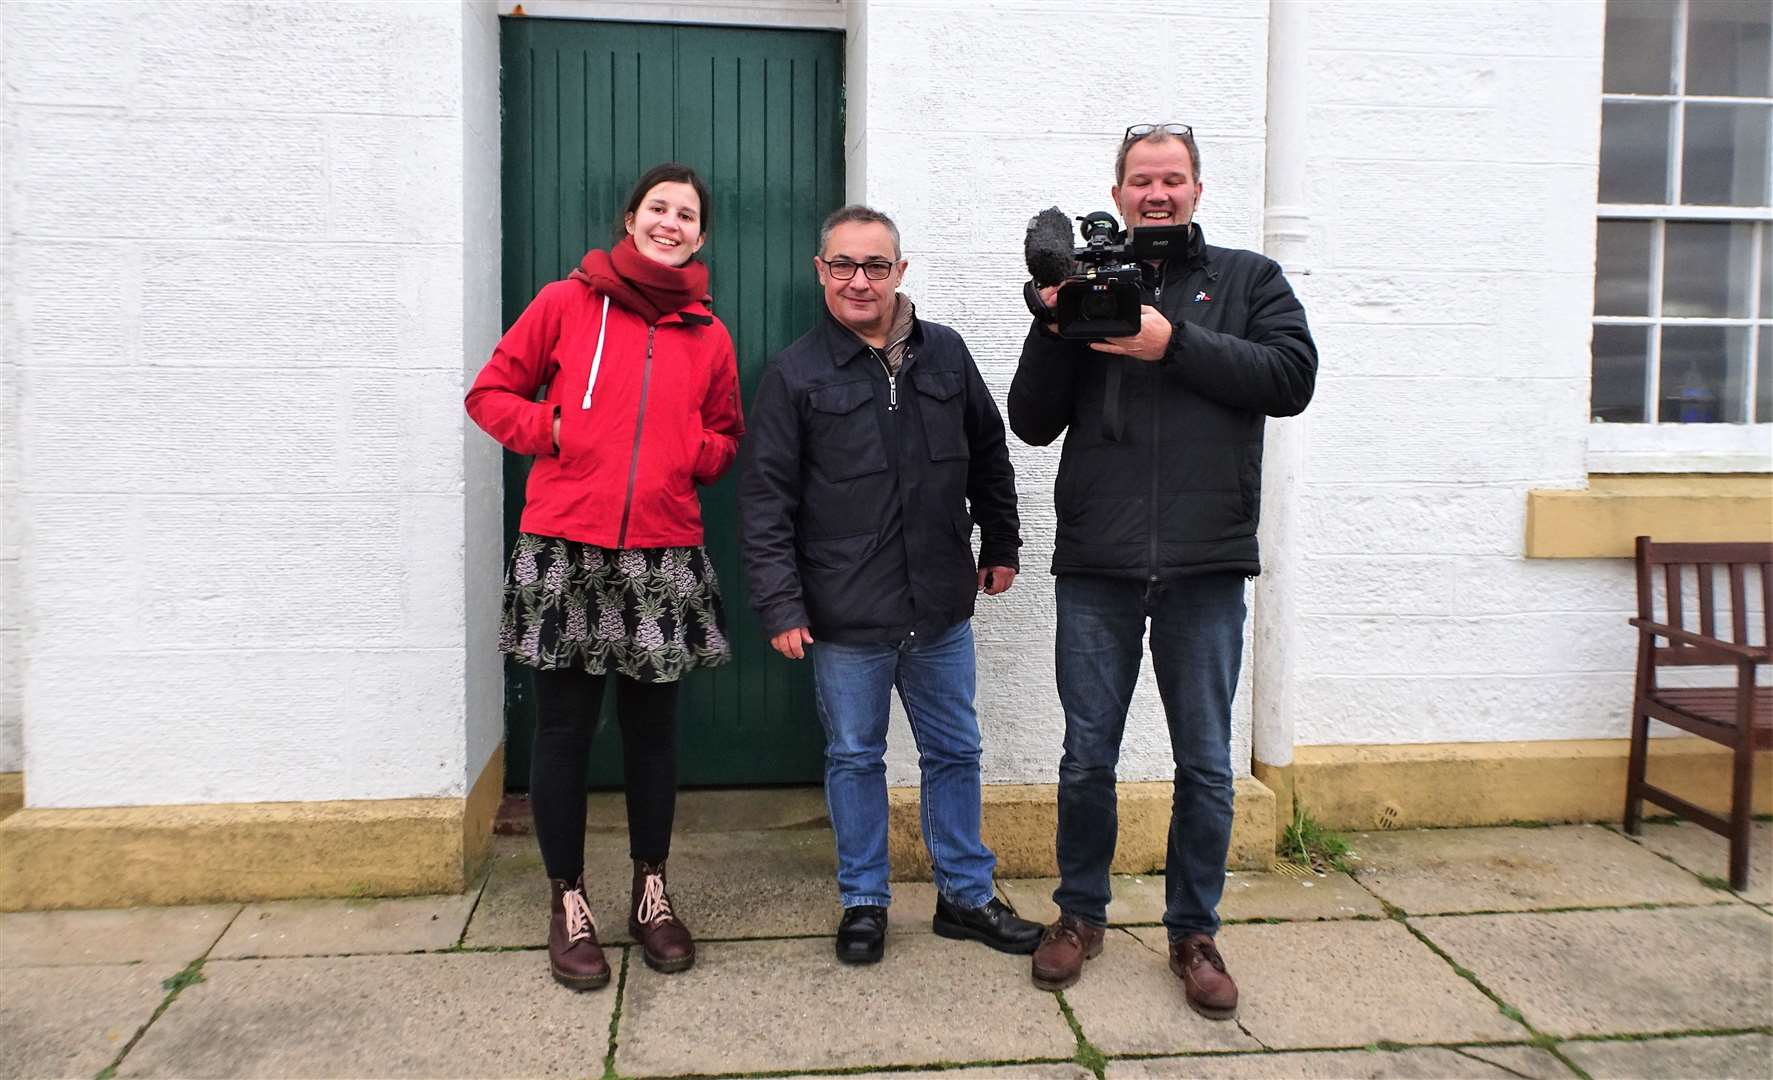 A French TV crew visited the iconic Caithness location two years ago.